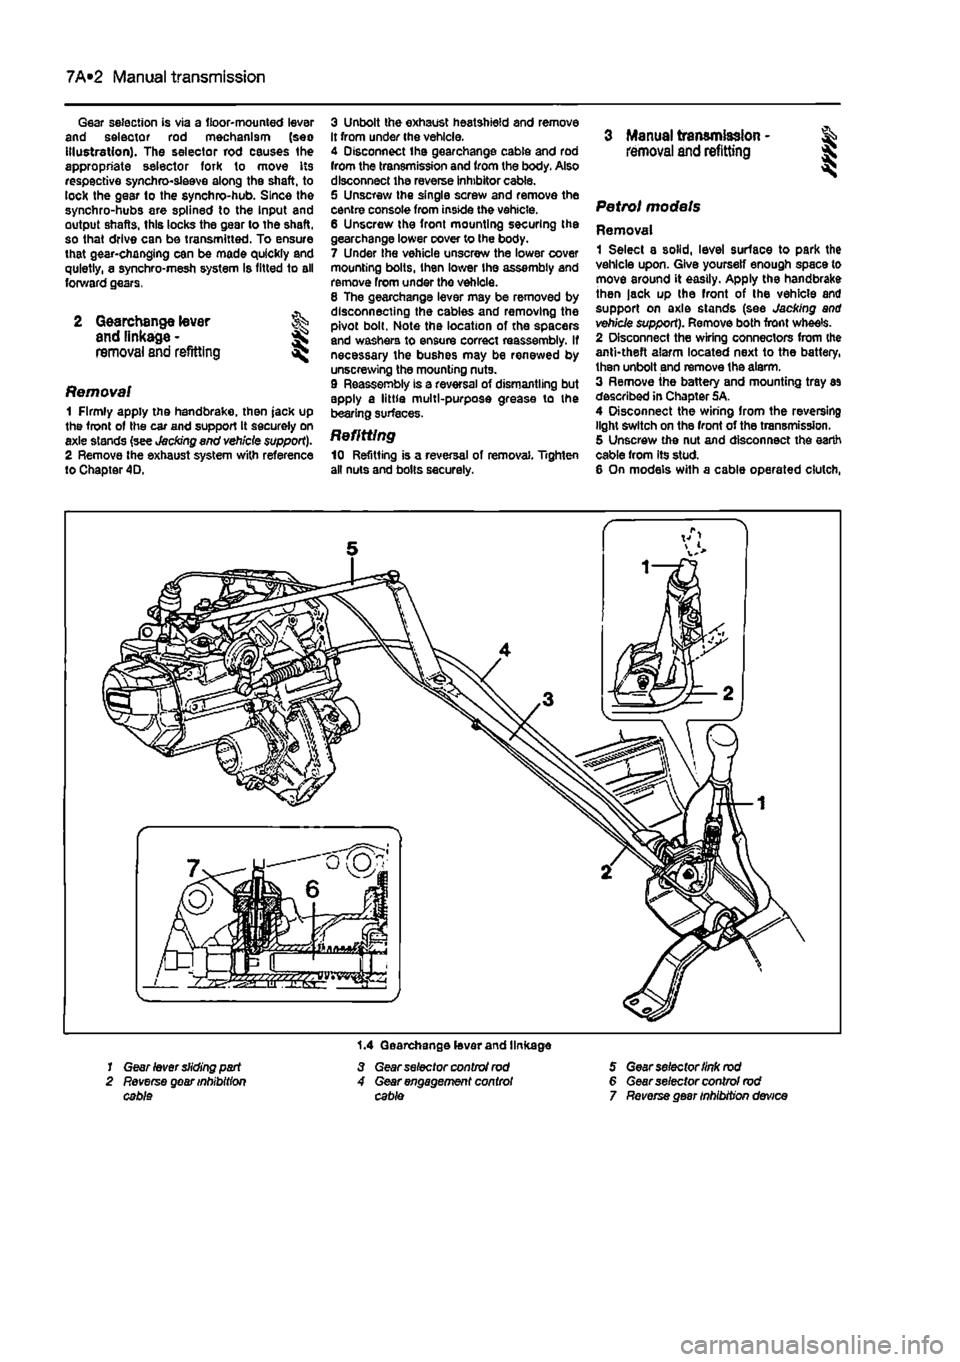 FIAT PUNTO 1994 176 / 1.G Owners Manual 
7A*2 Manual transmission 
Gear selection is via a floor-mounted lever and selector rod mechanism (seo Illustration). The selector rod causes the appropriate selector fork to move its respective synch